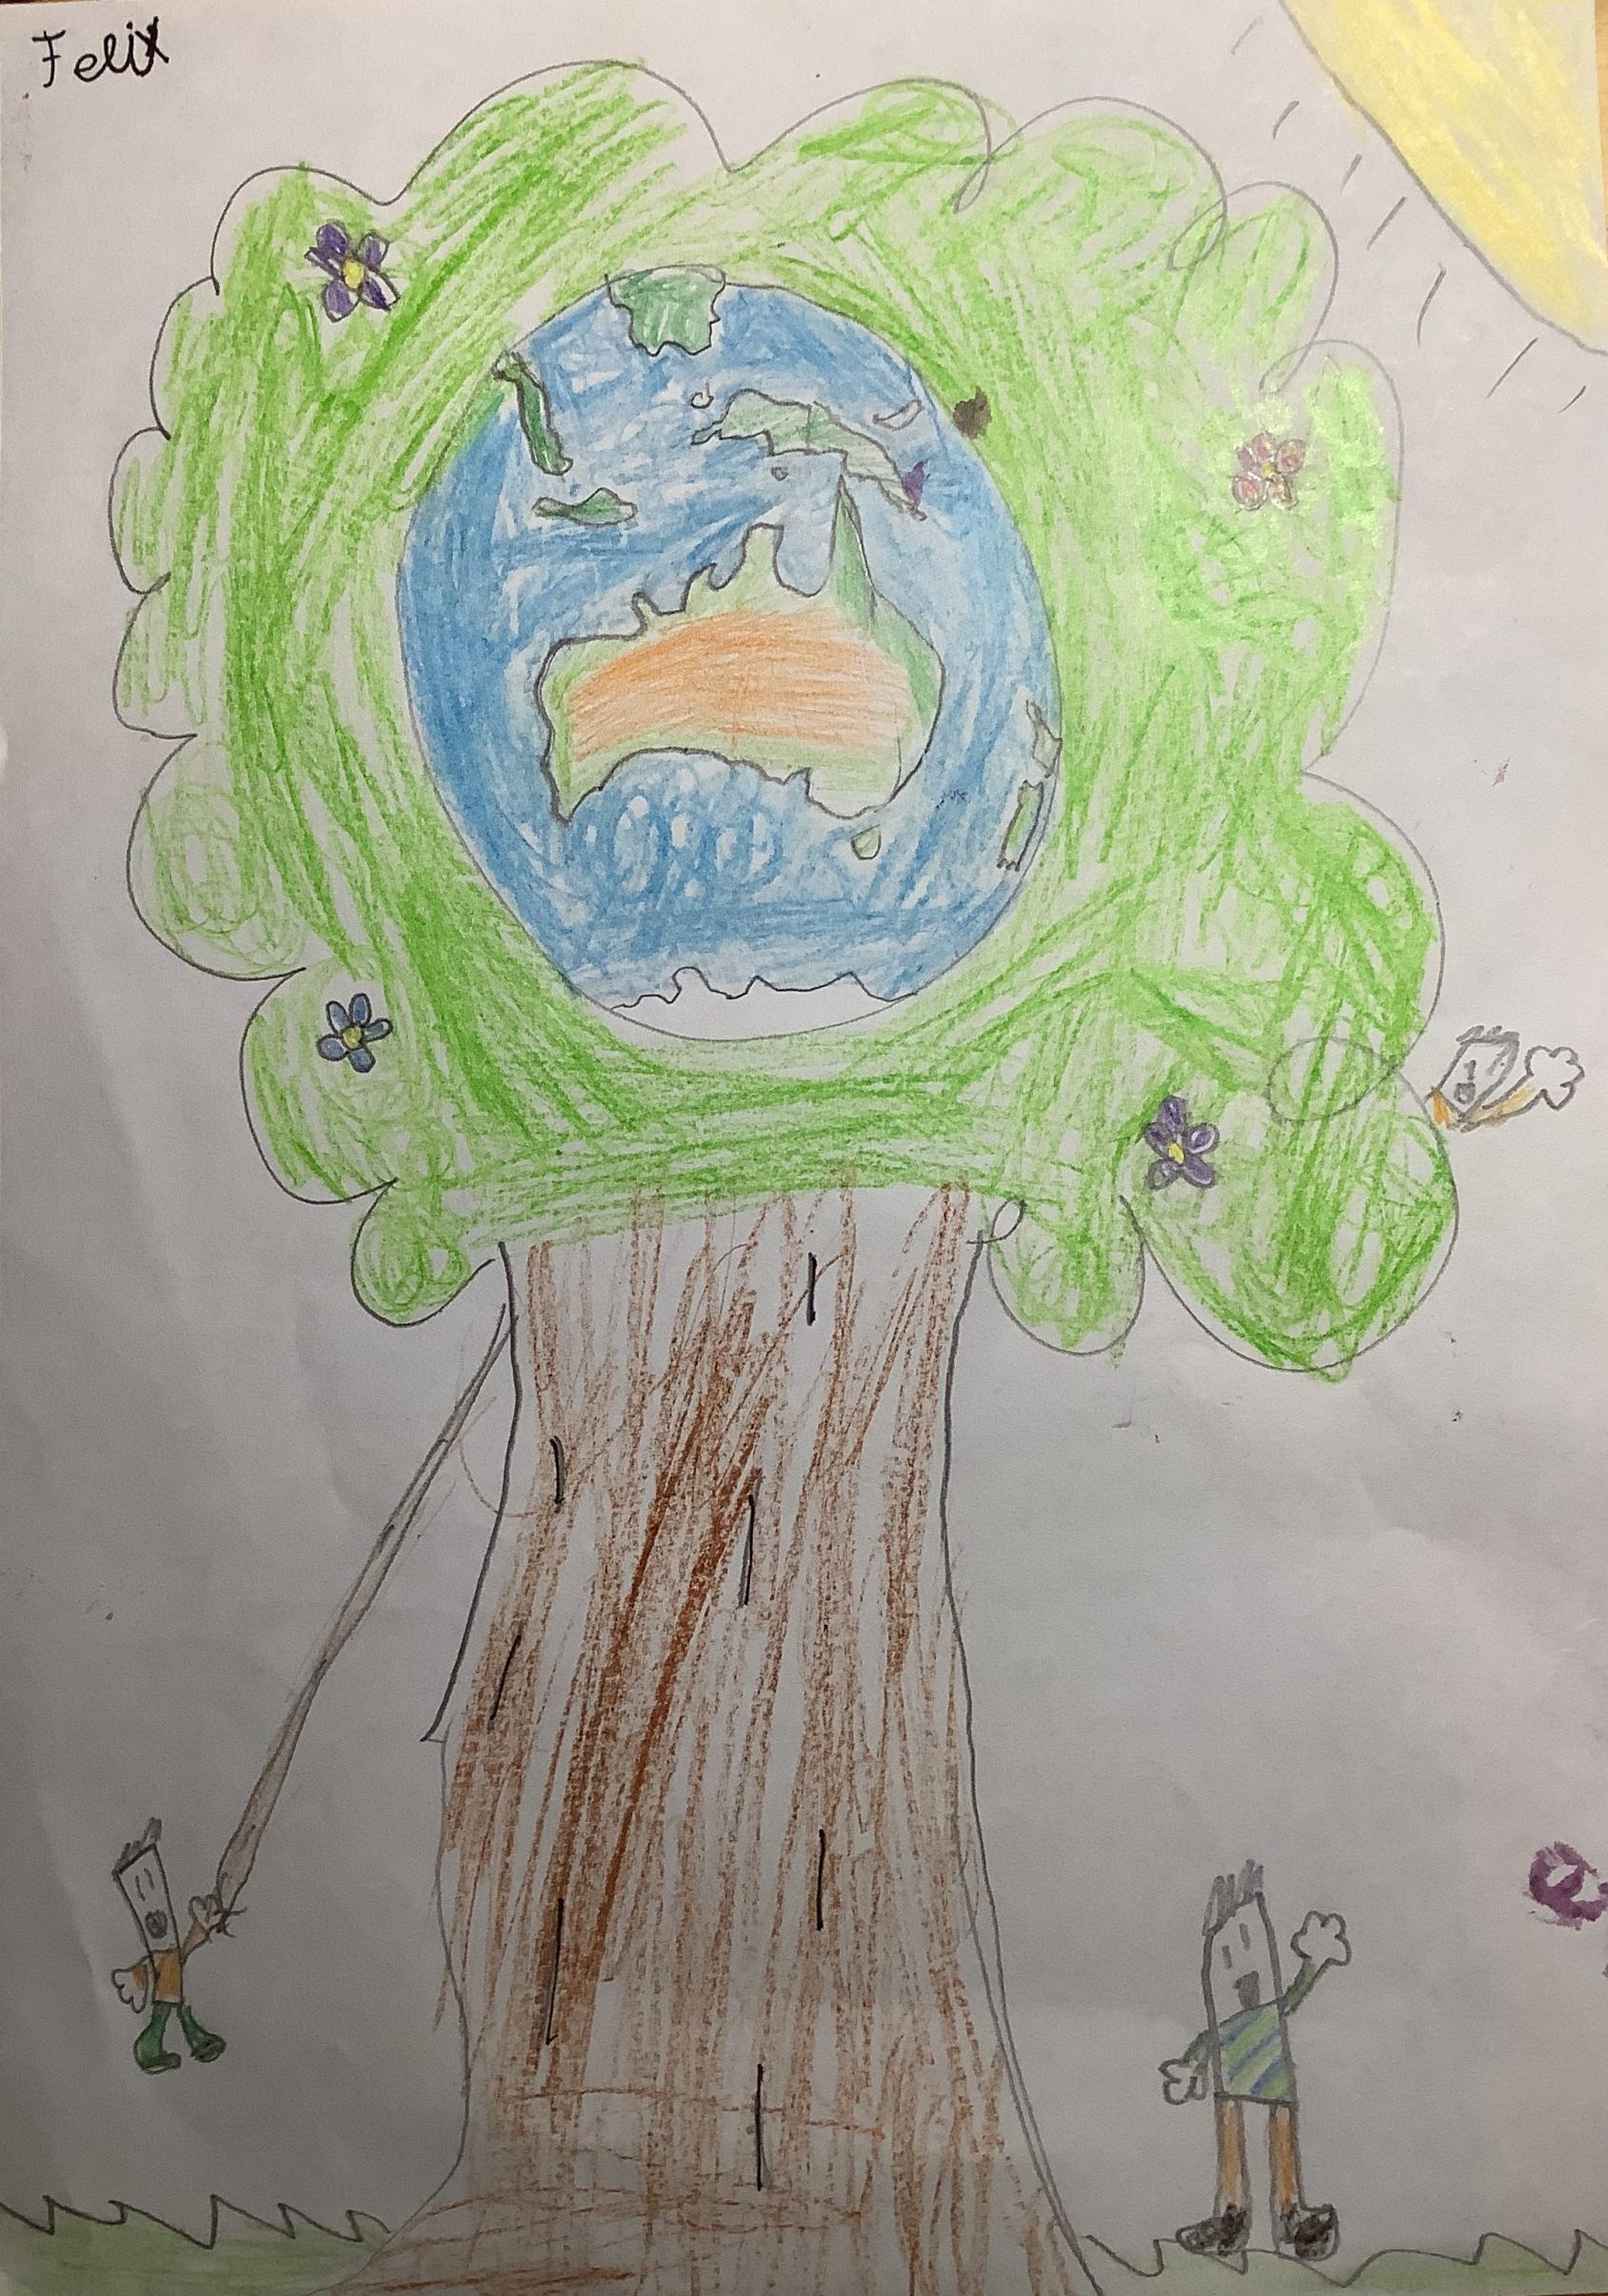 The land in trees - Kids Care About Climate Change 2021